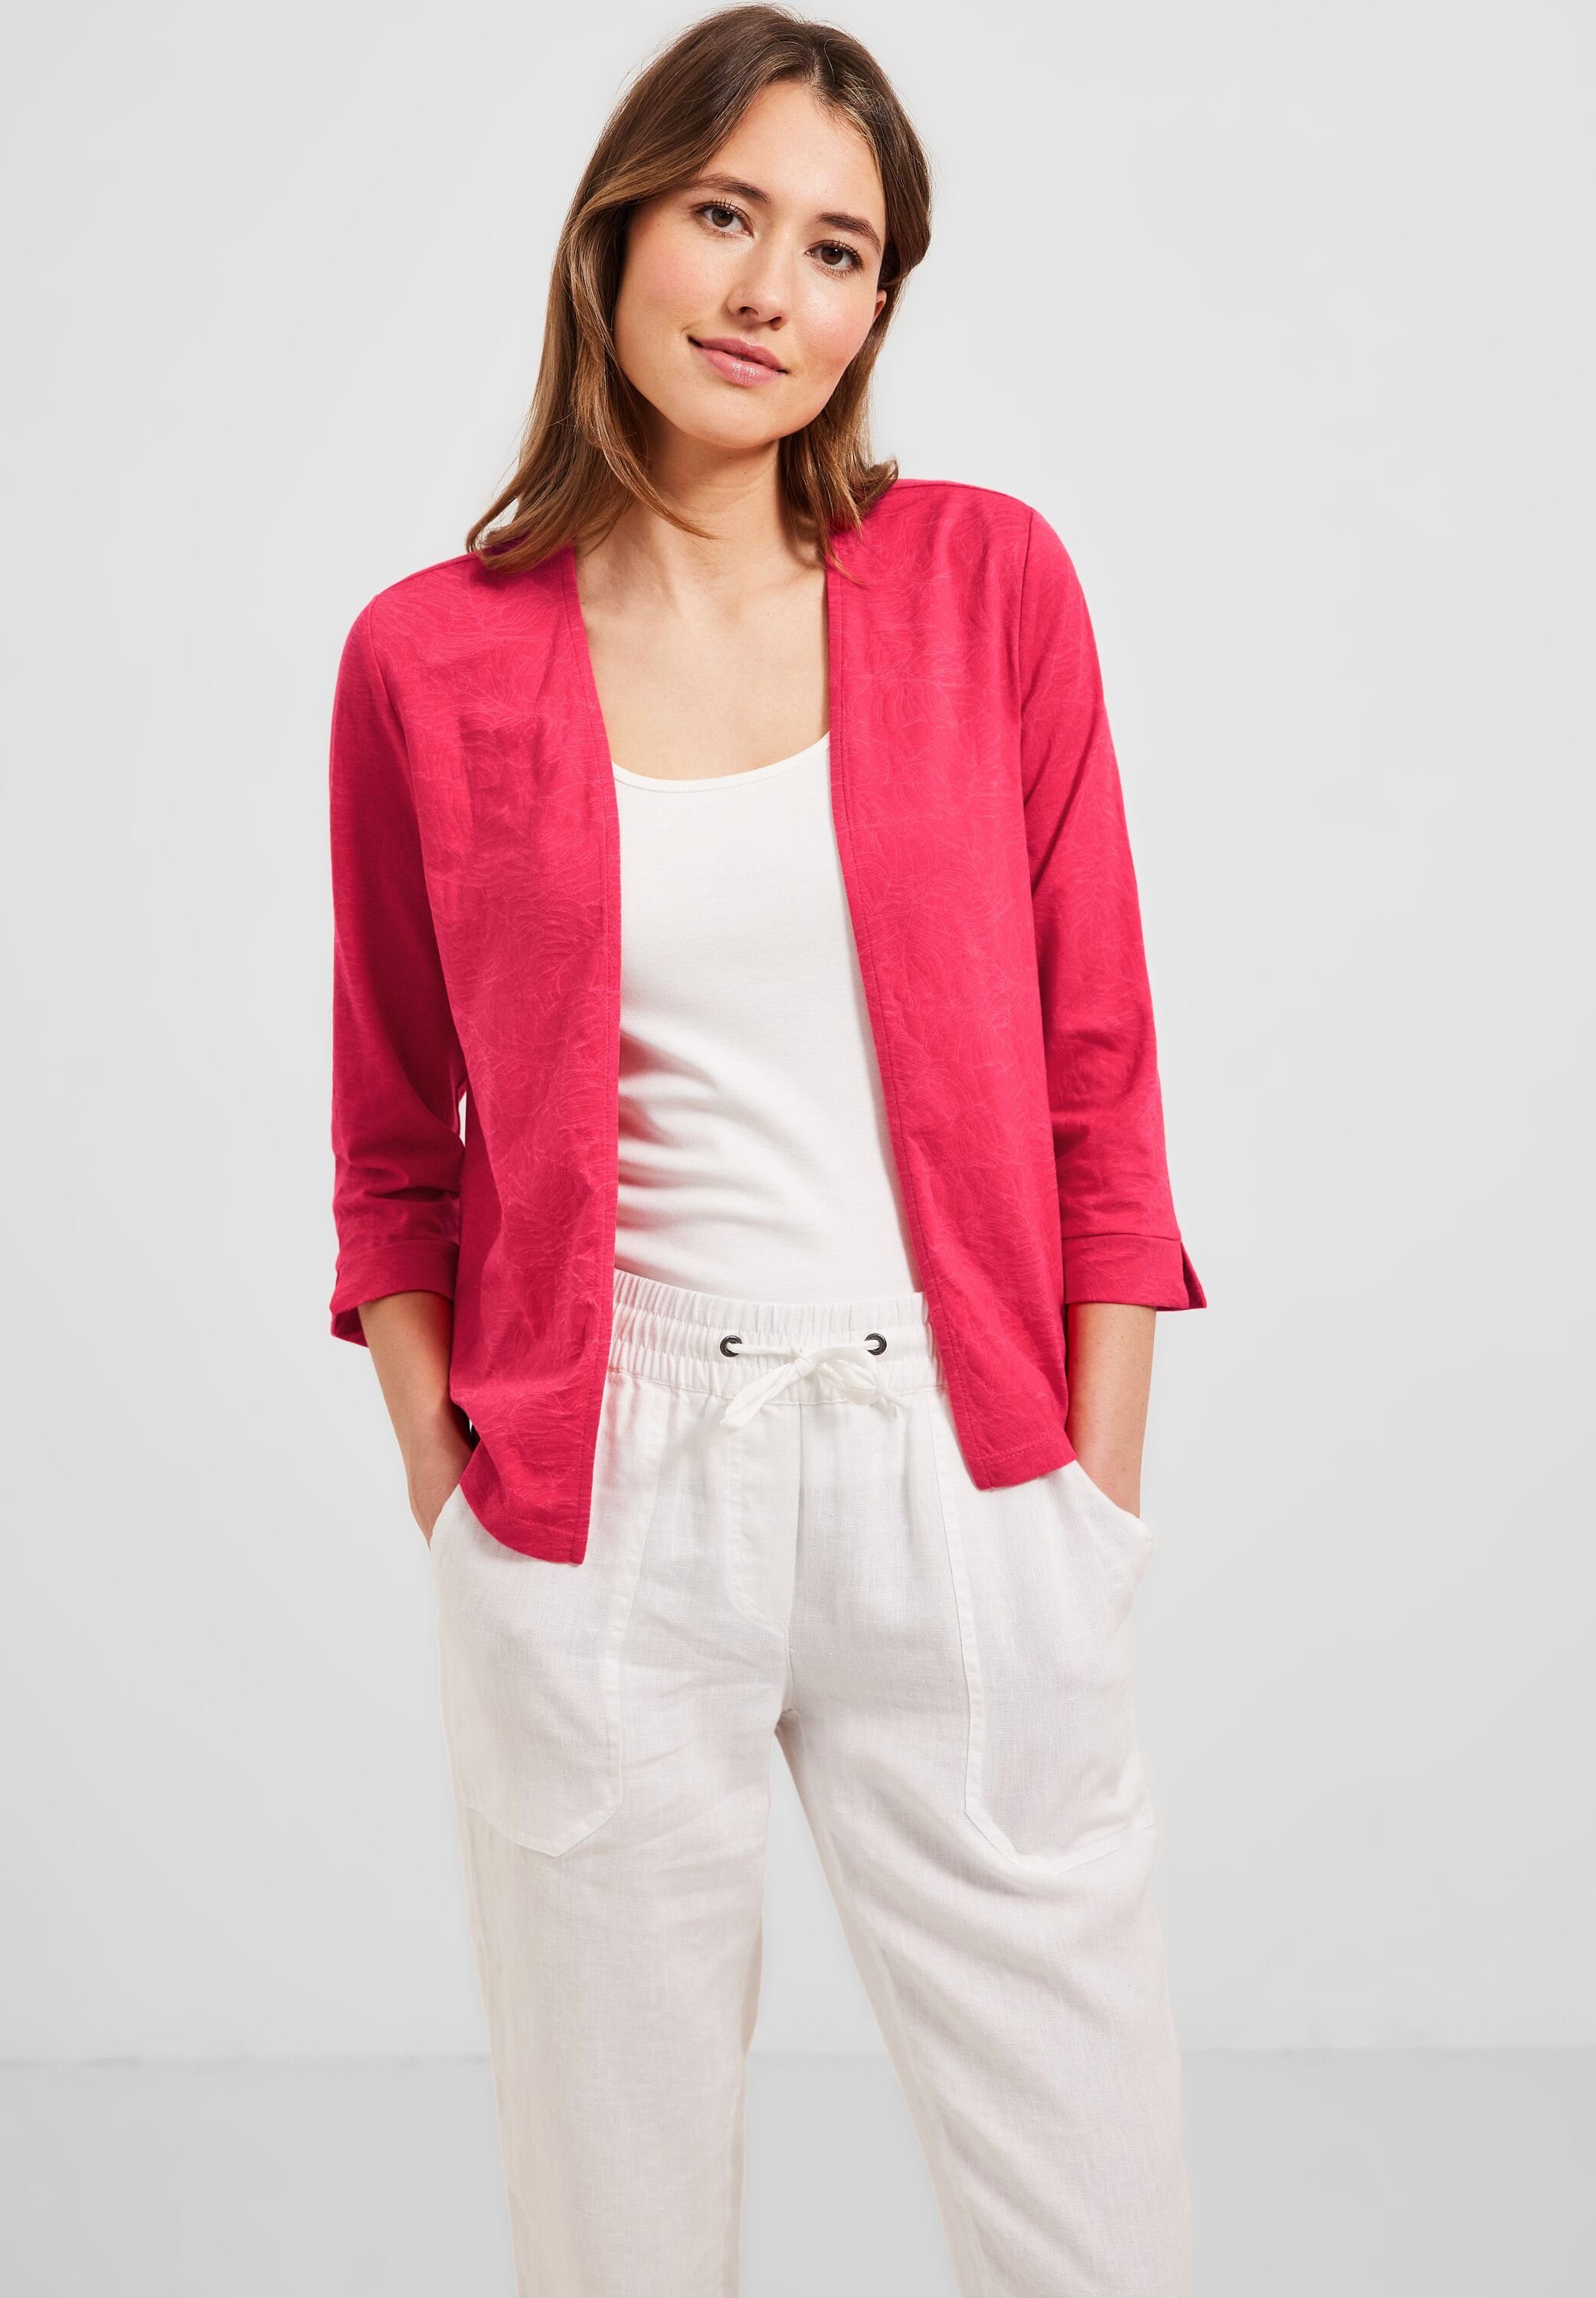 Shirtjacke strawberry red aus out Cecil burn Feinstrick